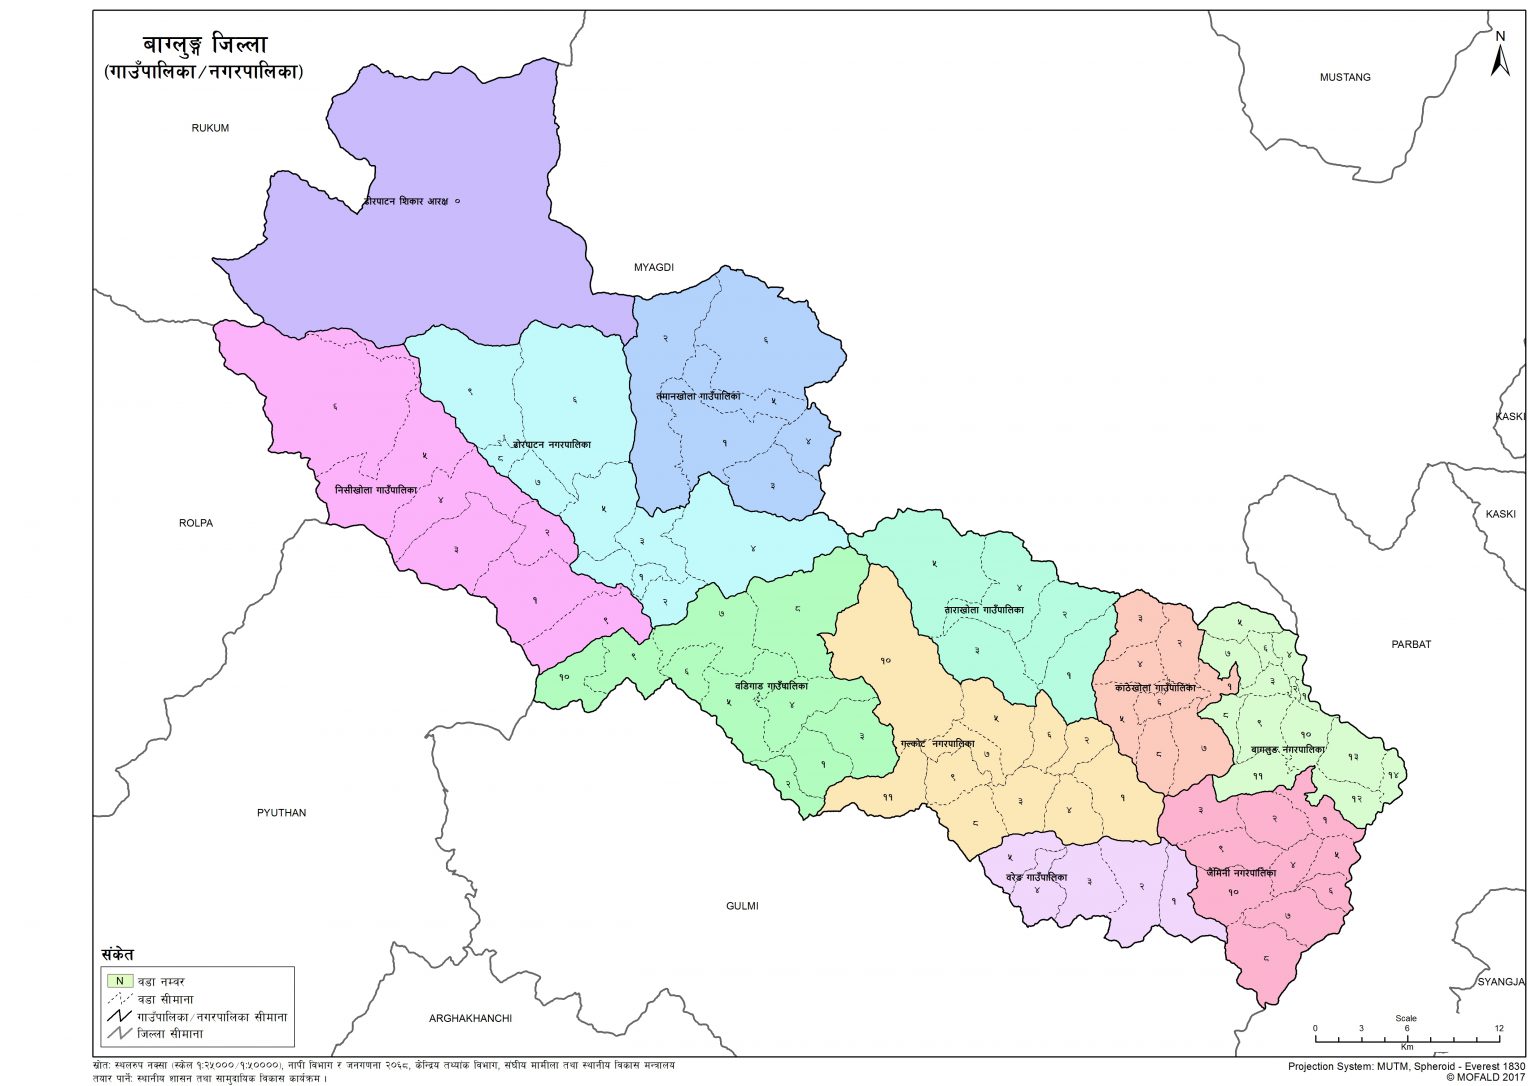 write an essay about baglung district